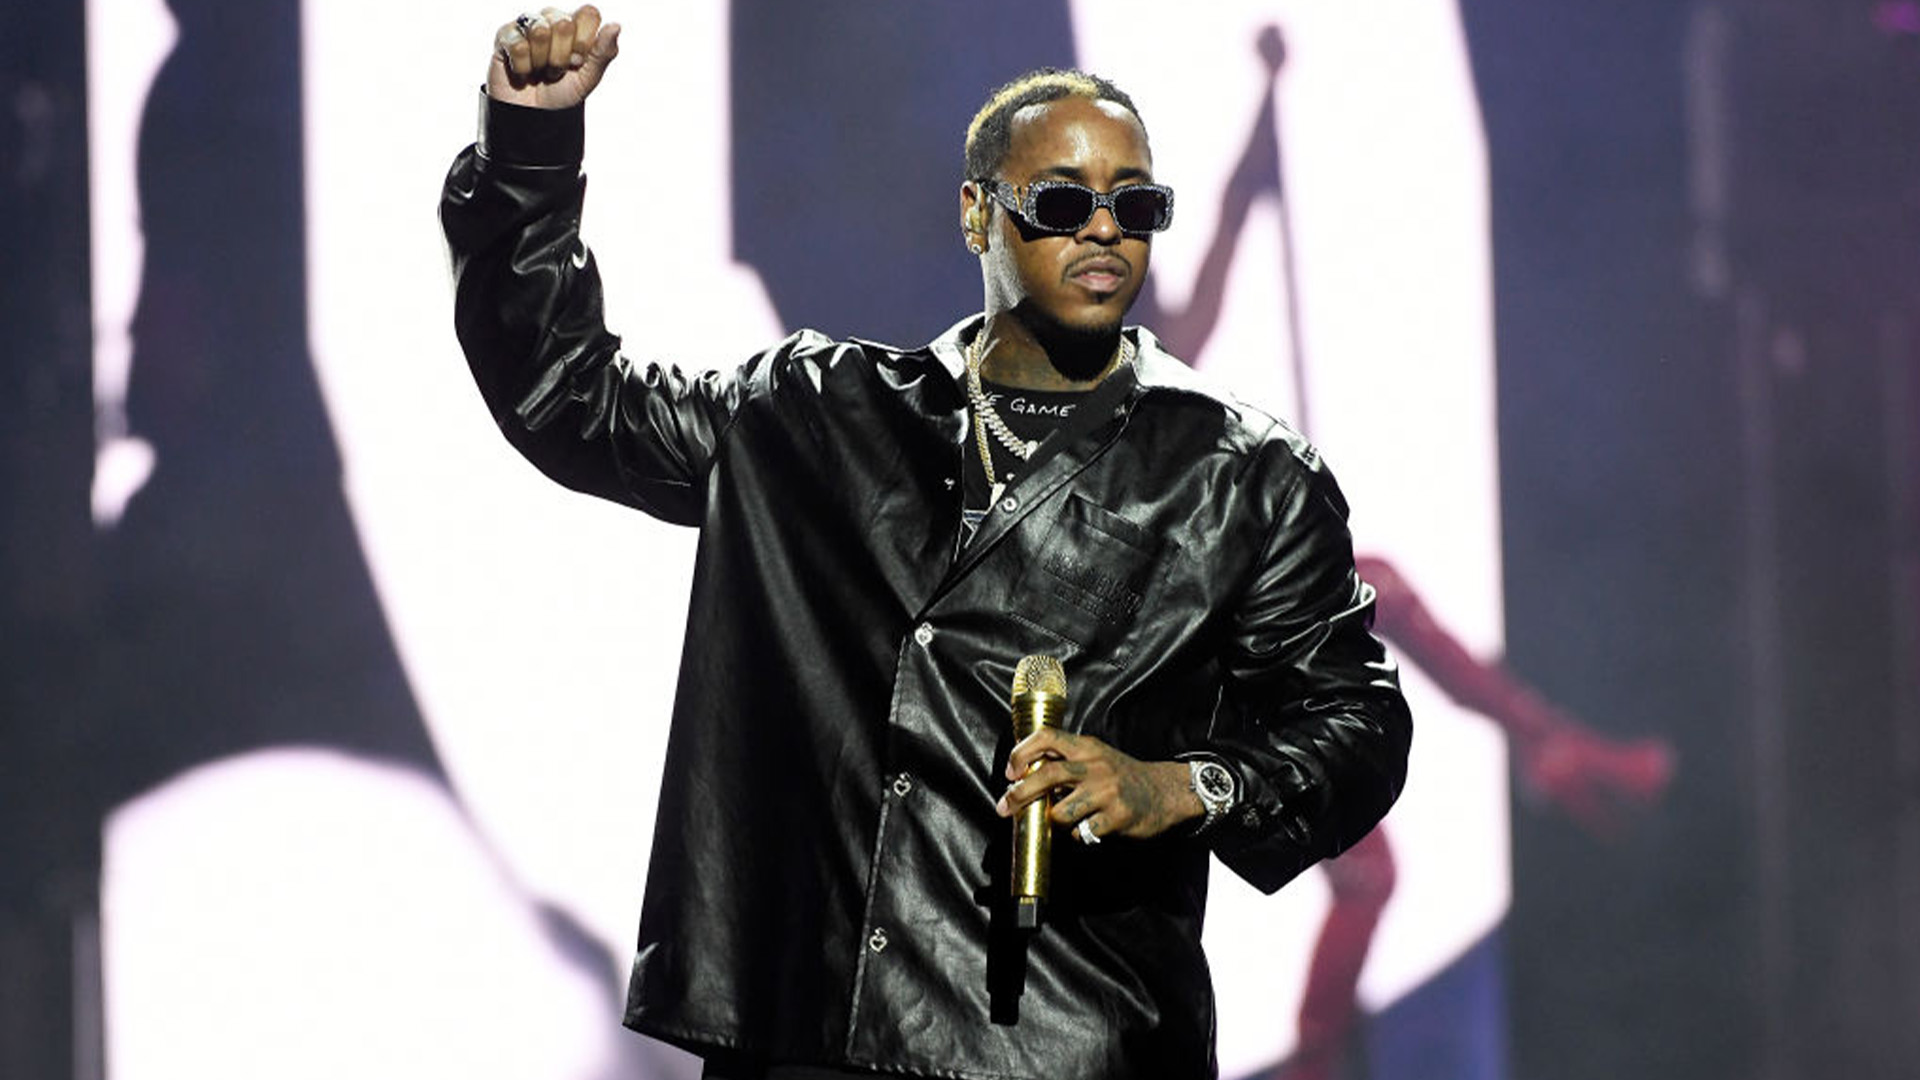 R&B Artist Jeremih Becomes The Latest To Sell Recorded And Publishing Assets In A New Deal